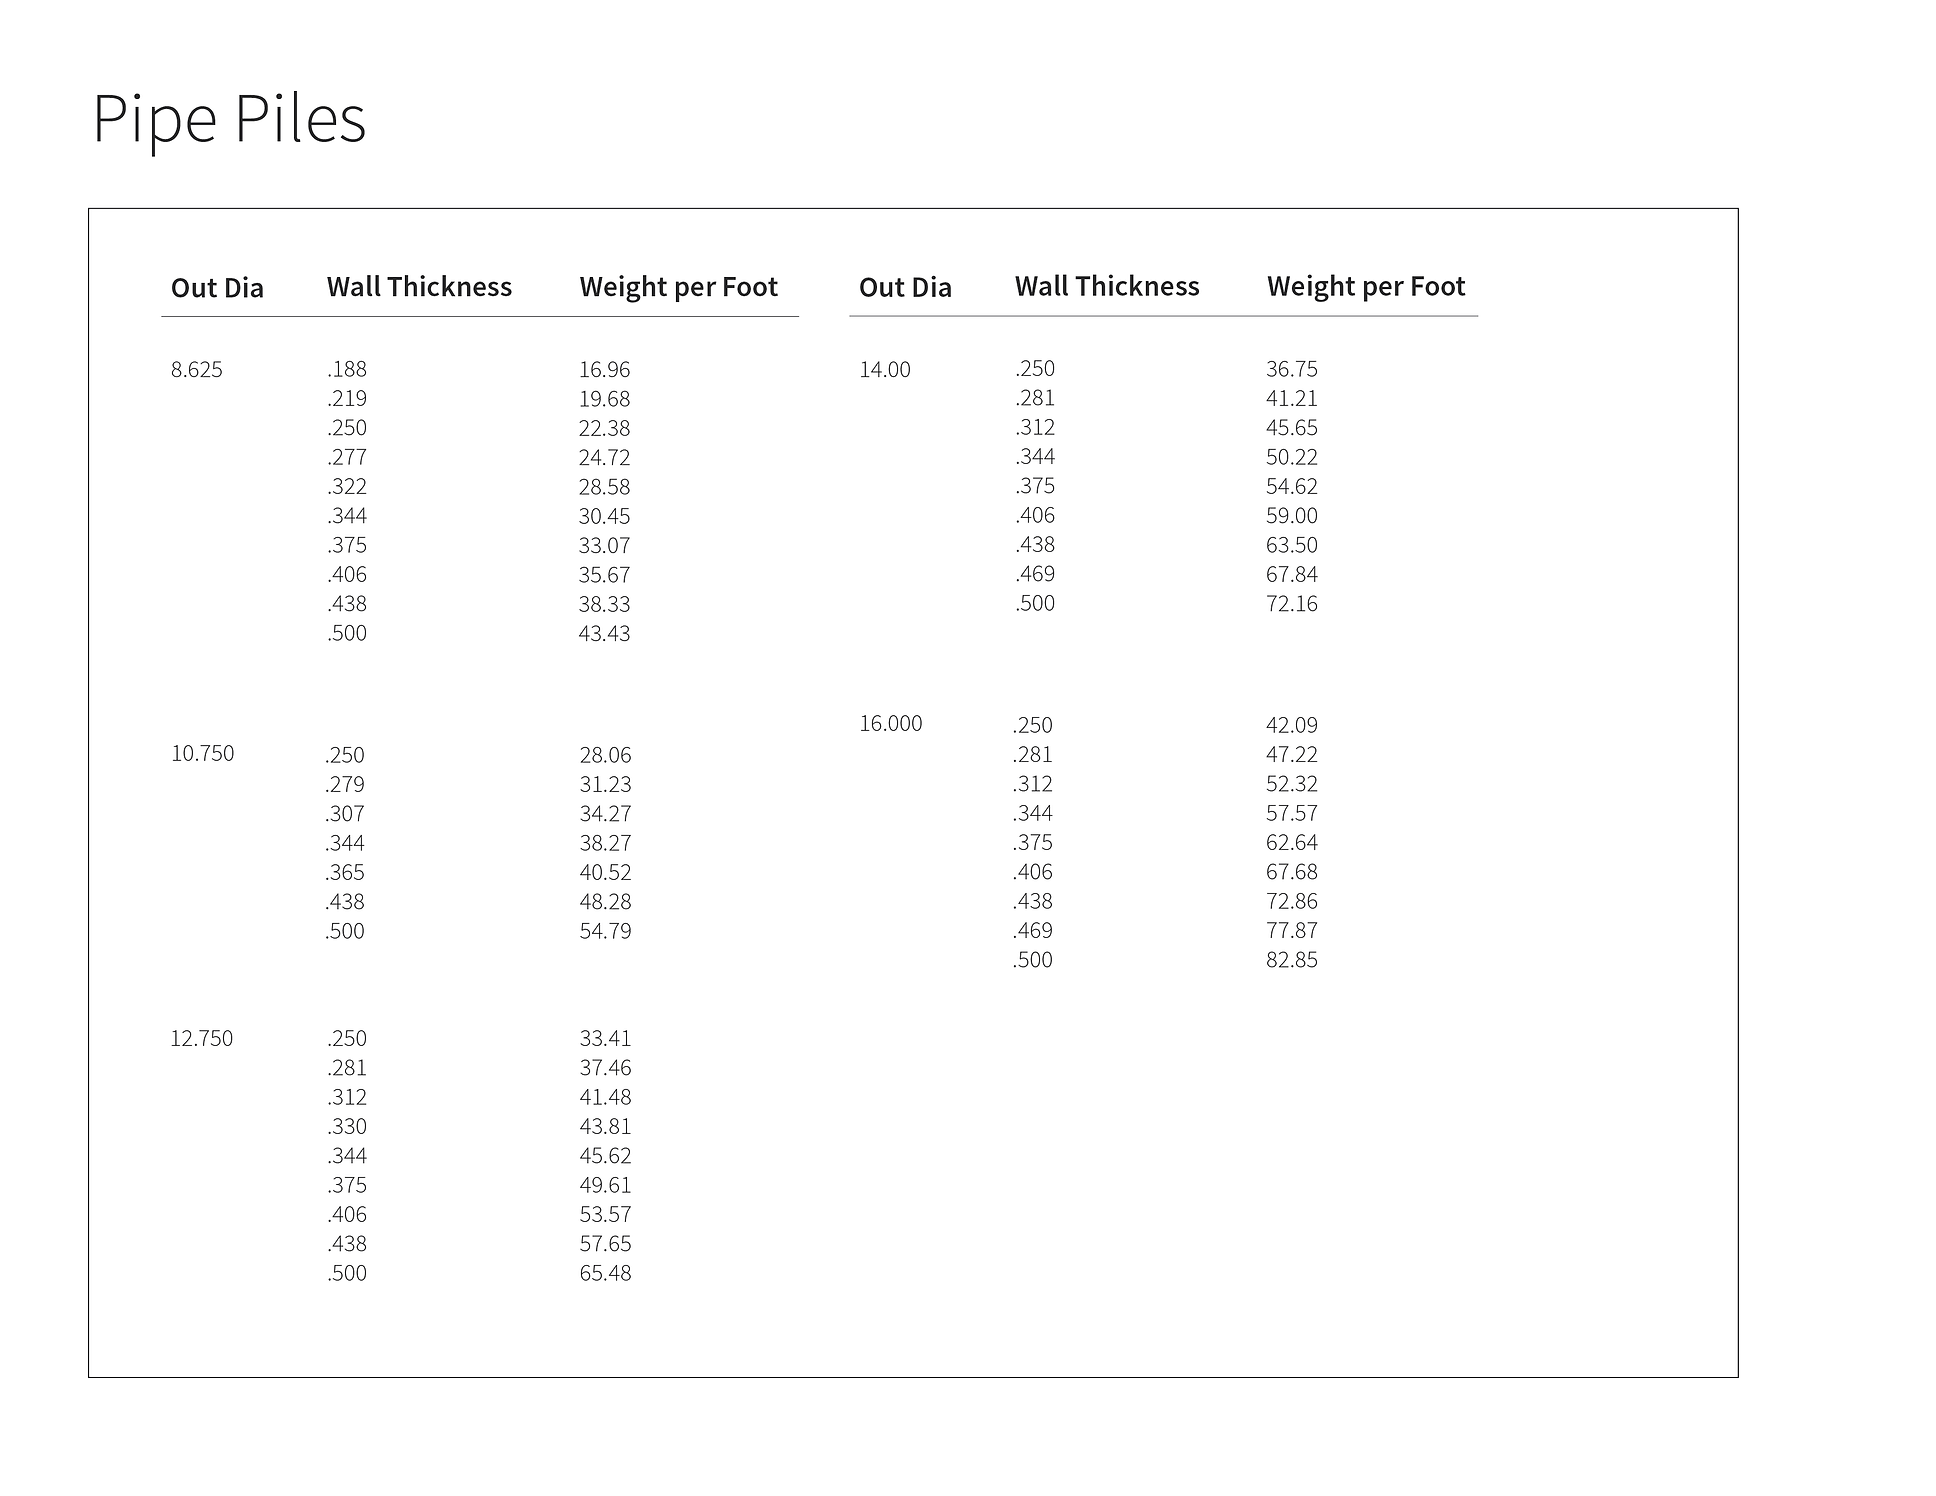 Pipe Piles S&R 2